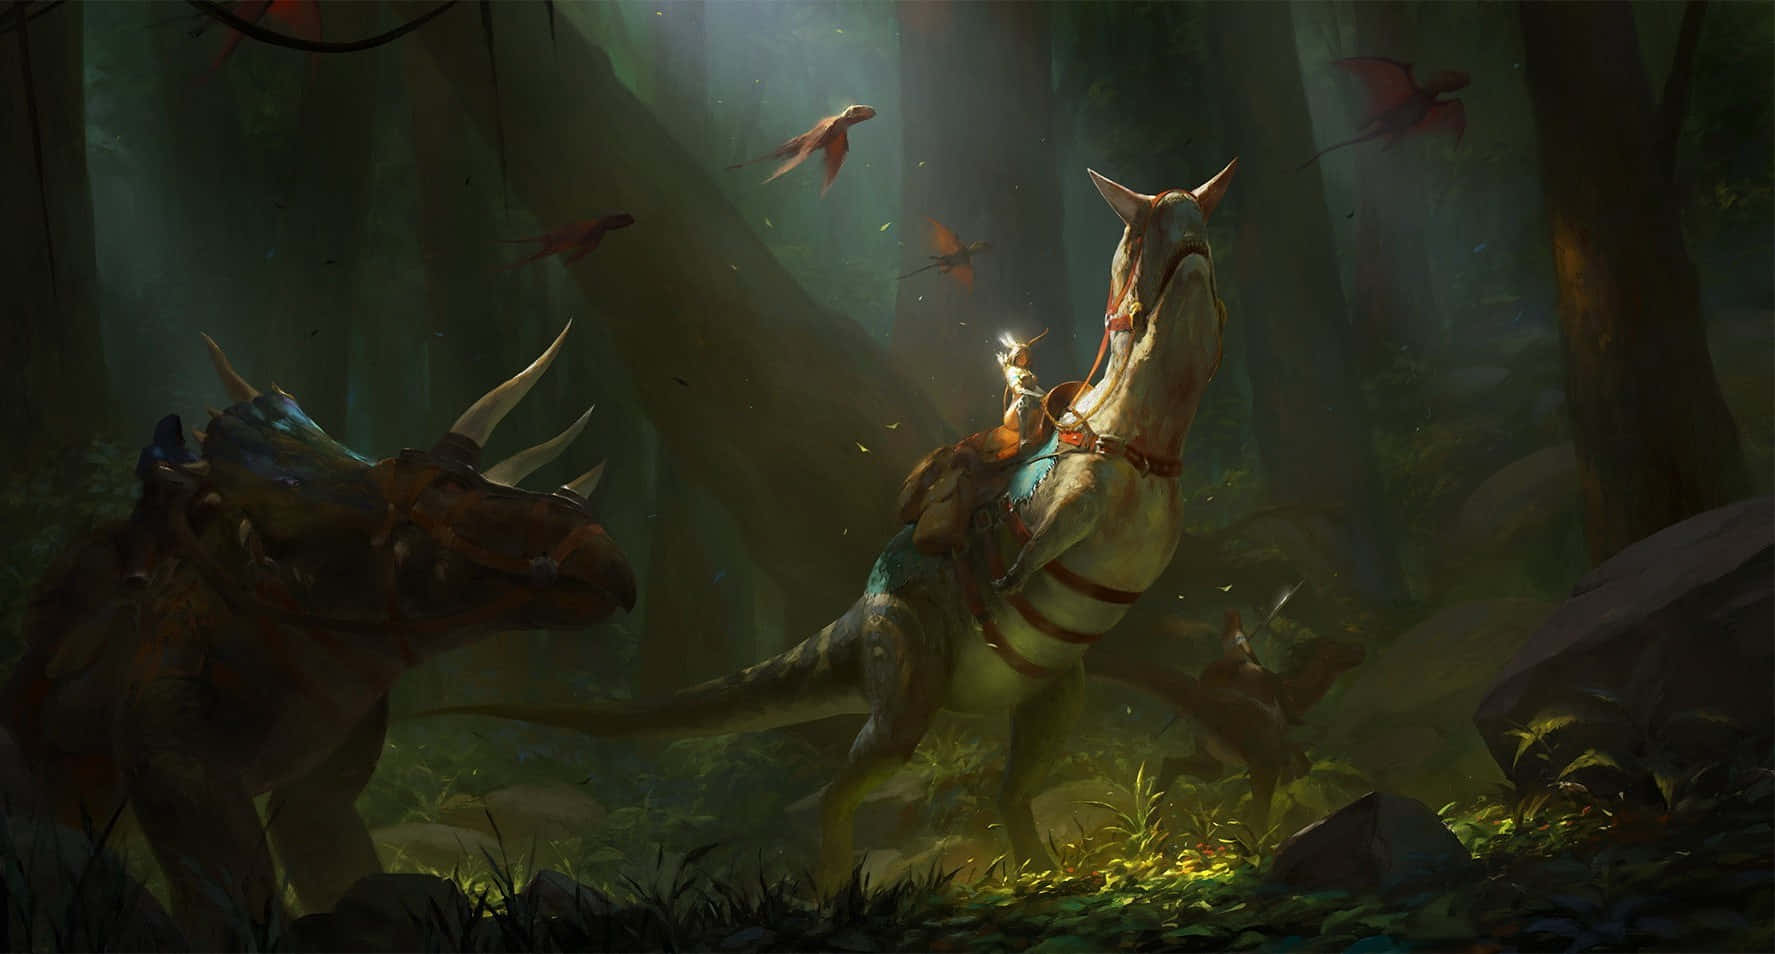 A Woman Riding A Dinosaur In The Forest